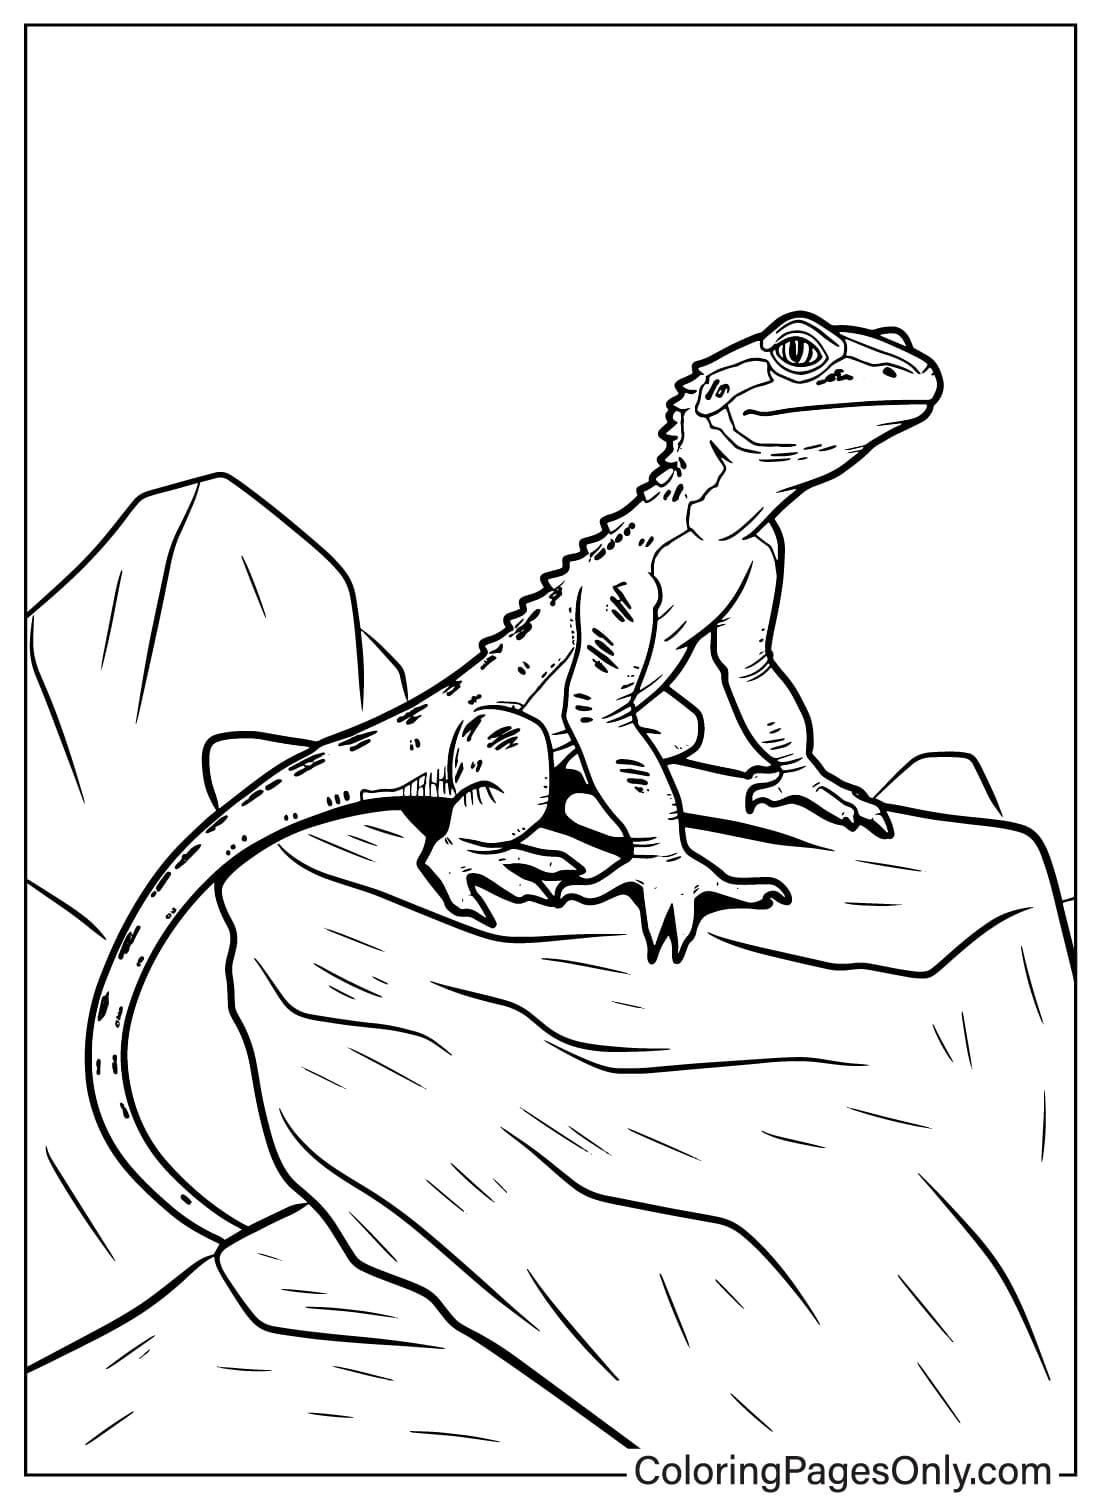 71 Free Printable Lizard Coloring Pages